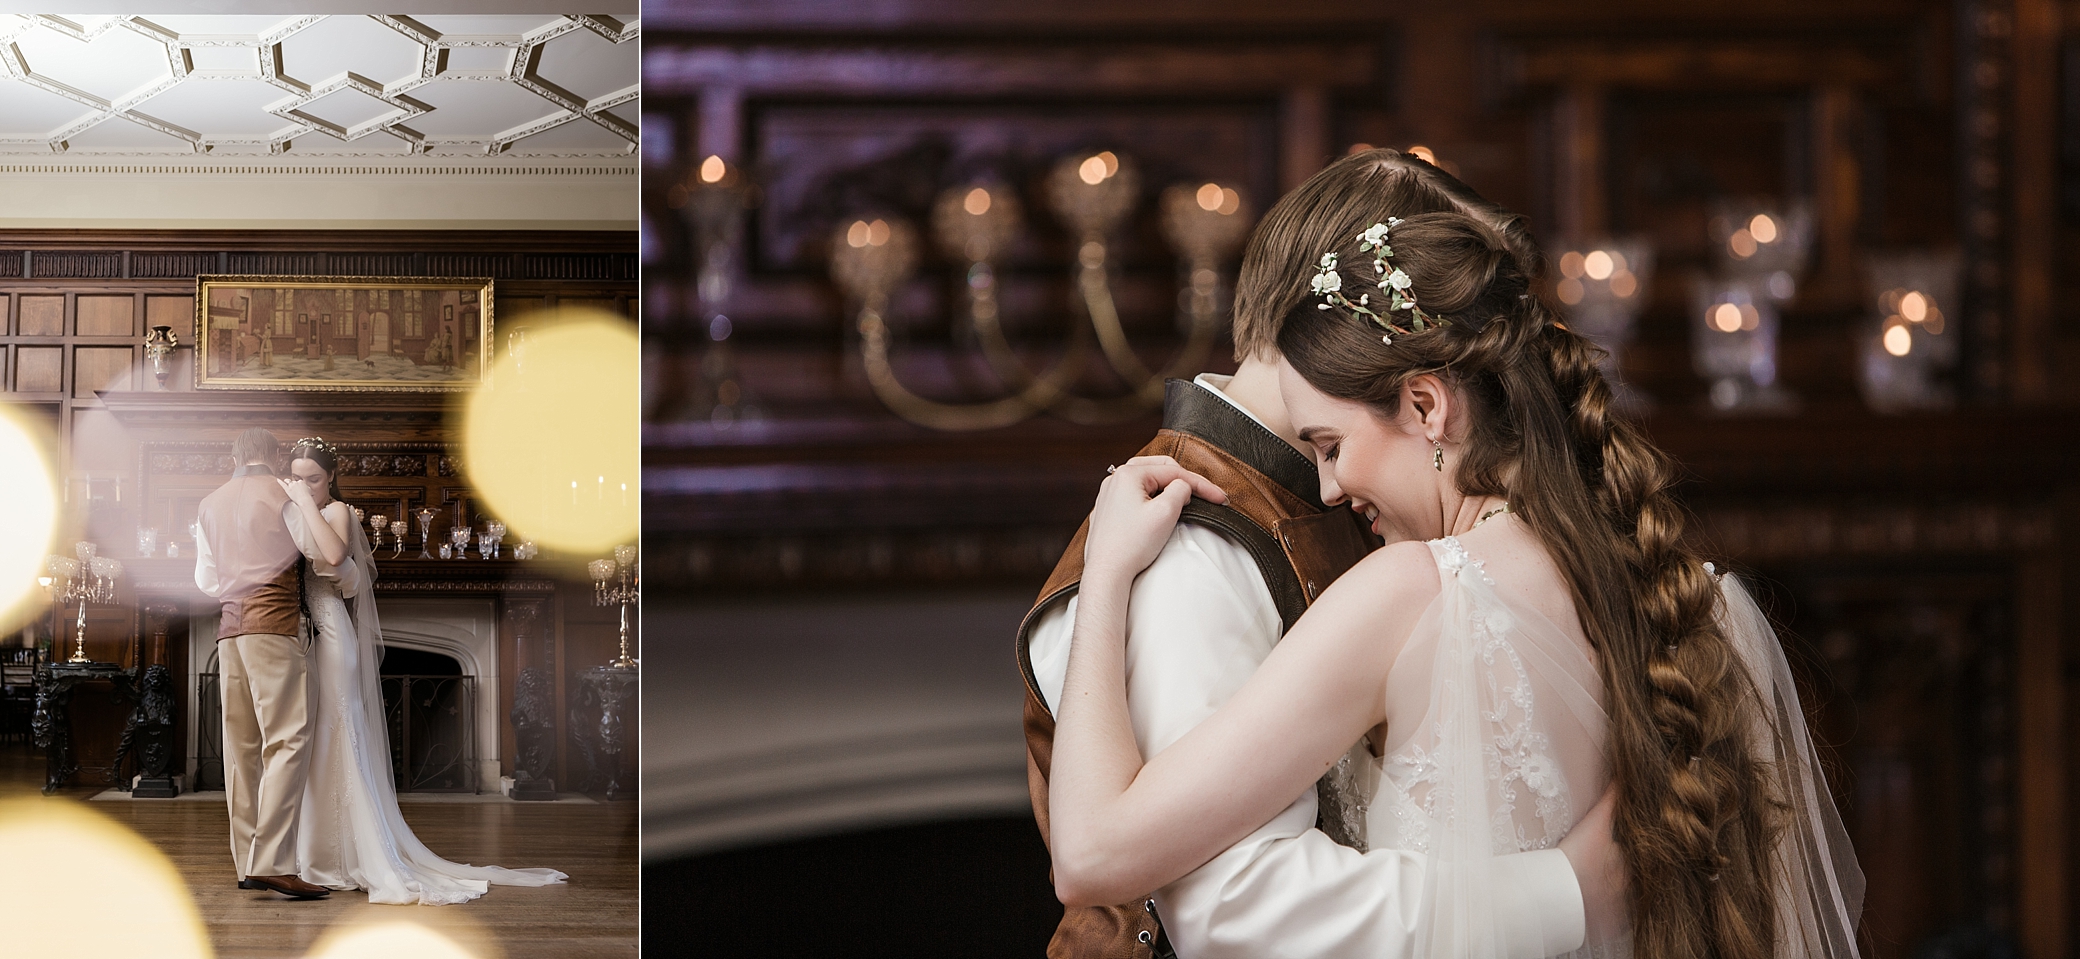 Bride and groom first dance at Thornewood Castle Wedding | Megan Montalvo Photography